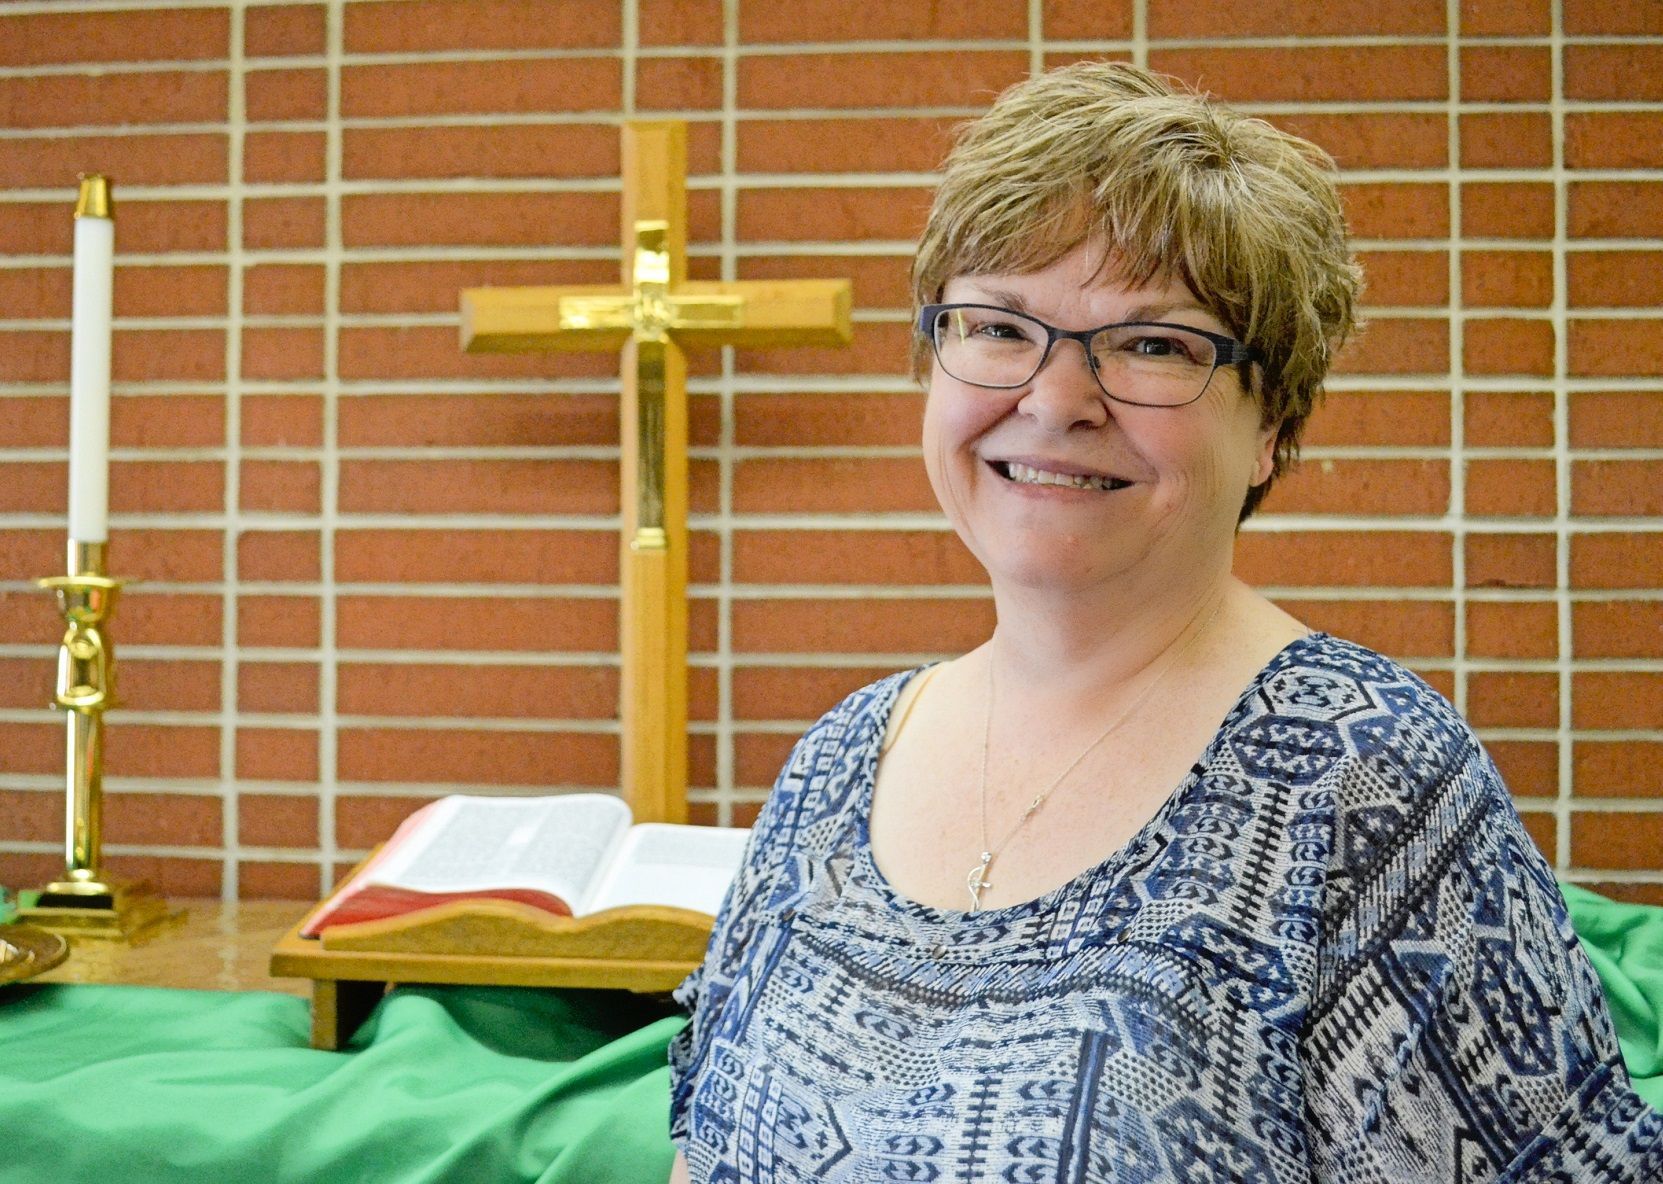 Schubert is new pastor at First United Methodist